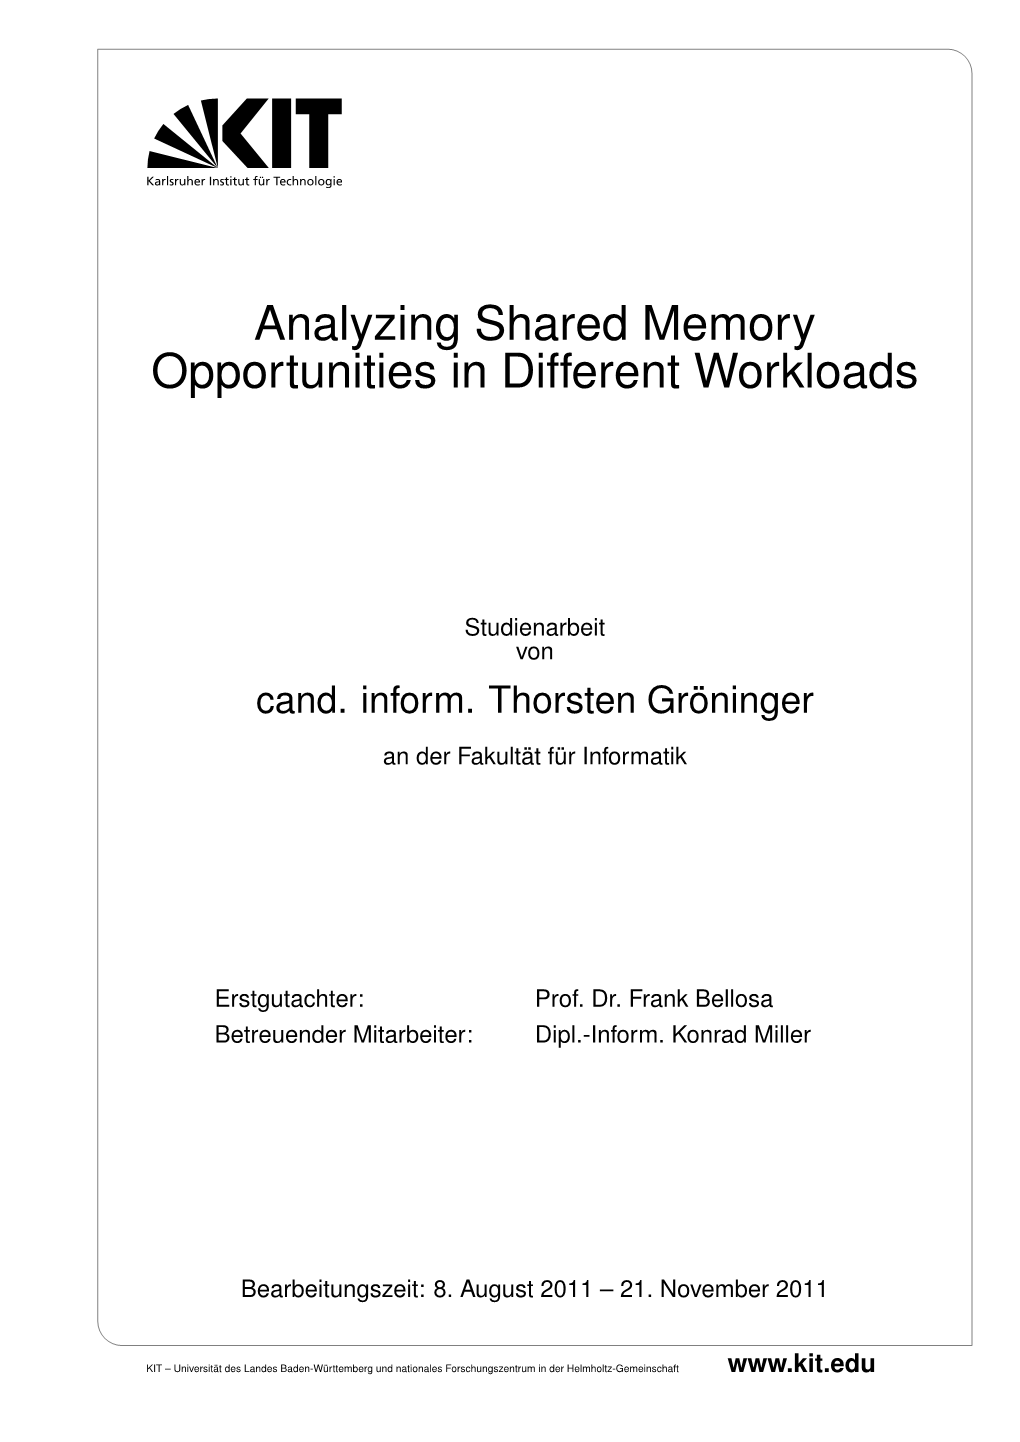 Analyzing Shared Memory Opportunities in Different Workloads